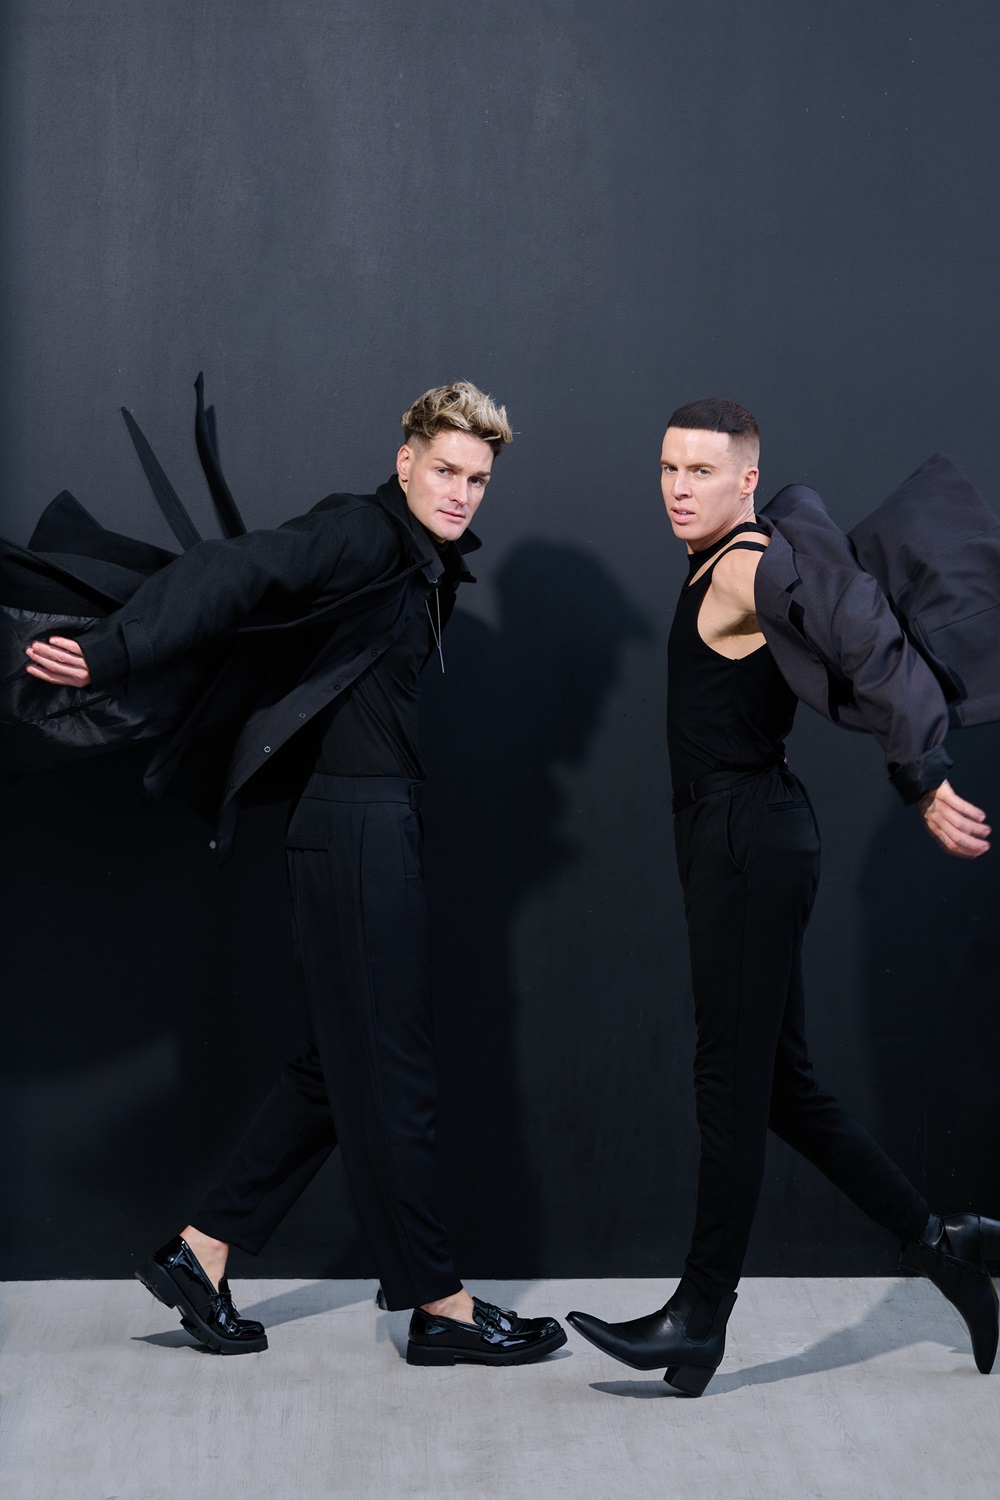 World-renowned dancers Dale Molloy and Adrian Bennett Join Forces at Chace Dance Company 